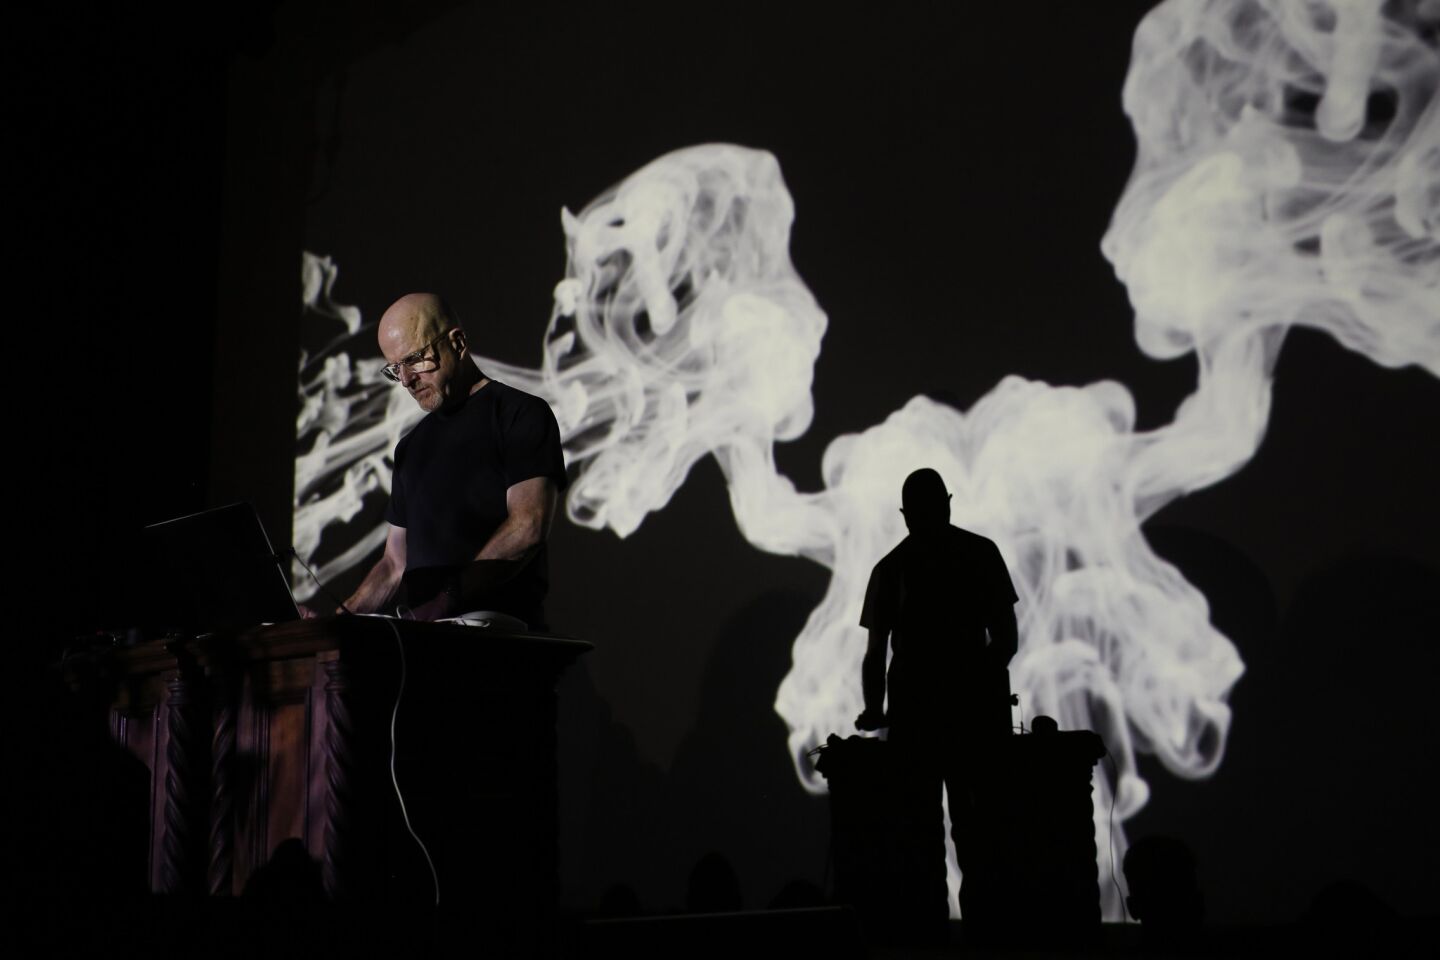 Experimental artist Lustmord makes his Los Angeles debut on March 21 at the Masonic Lodge at Hollywood Forever.